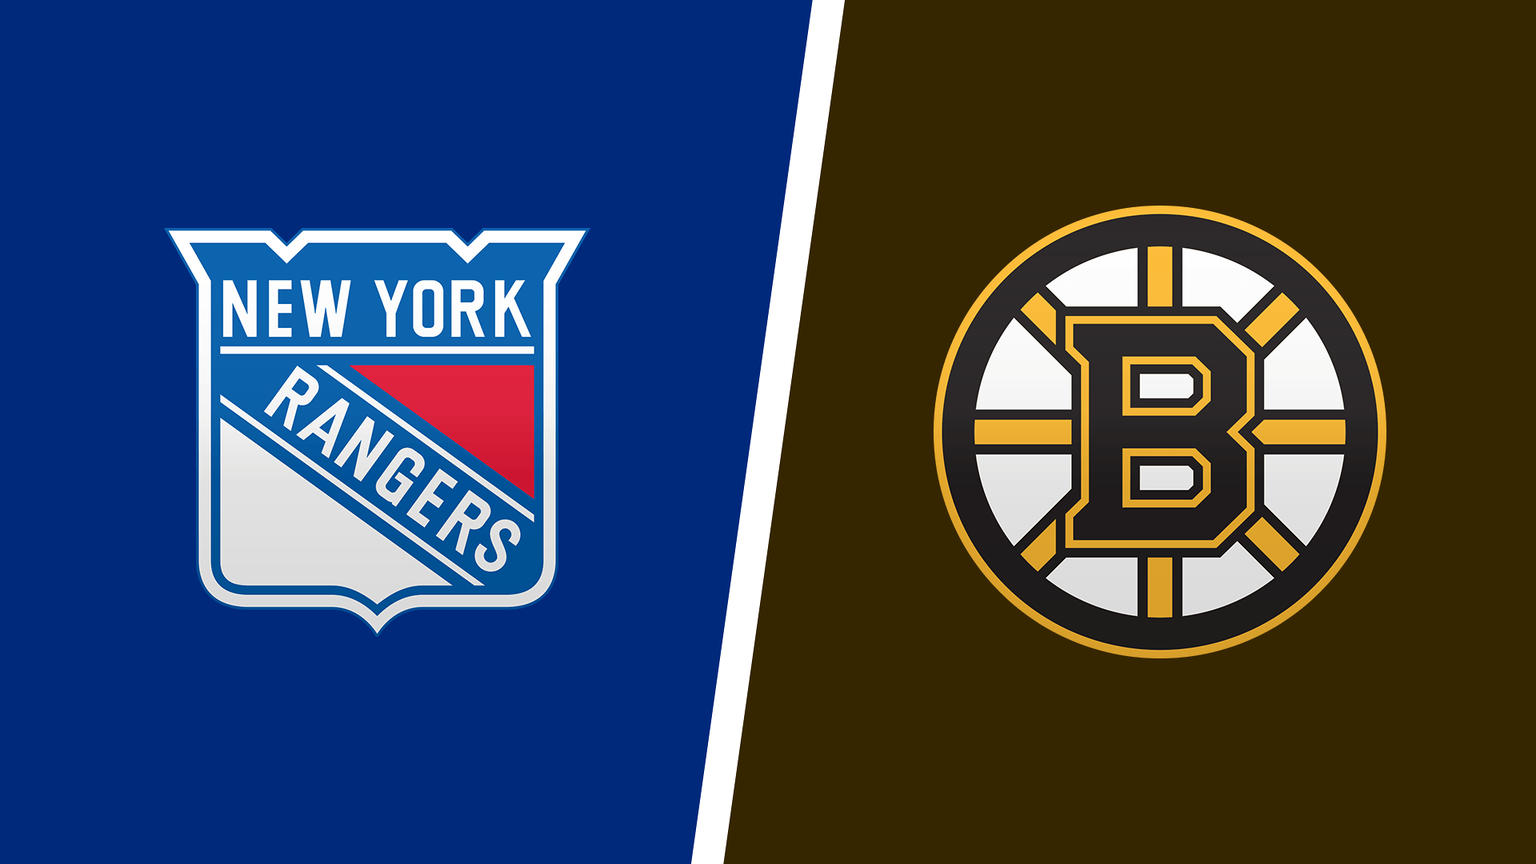 How to Watch Boston Bruins vs. New York Rangers Game Live Online on